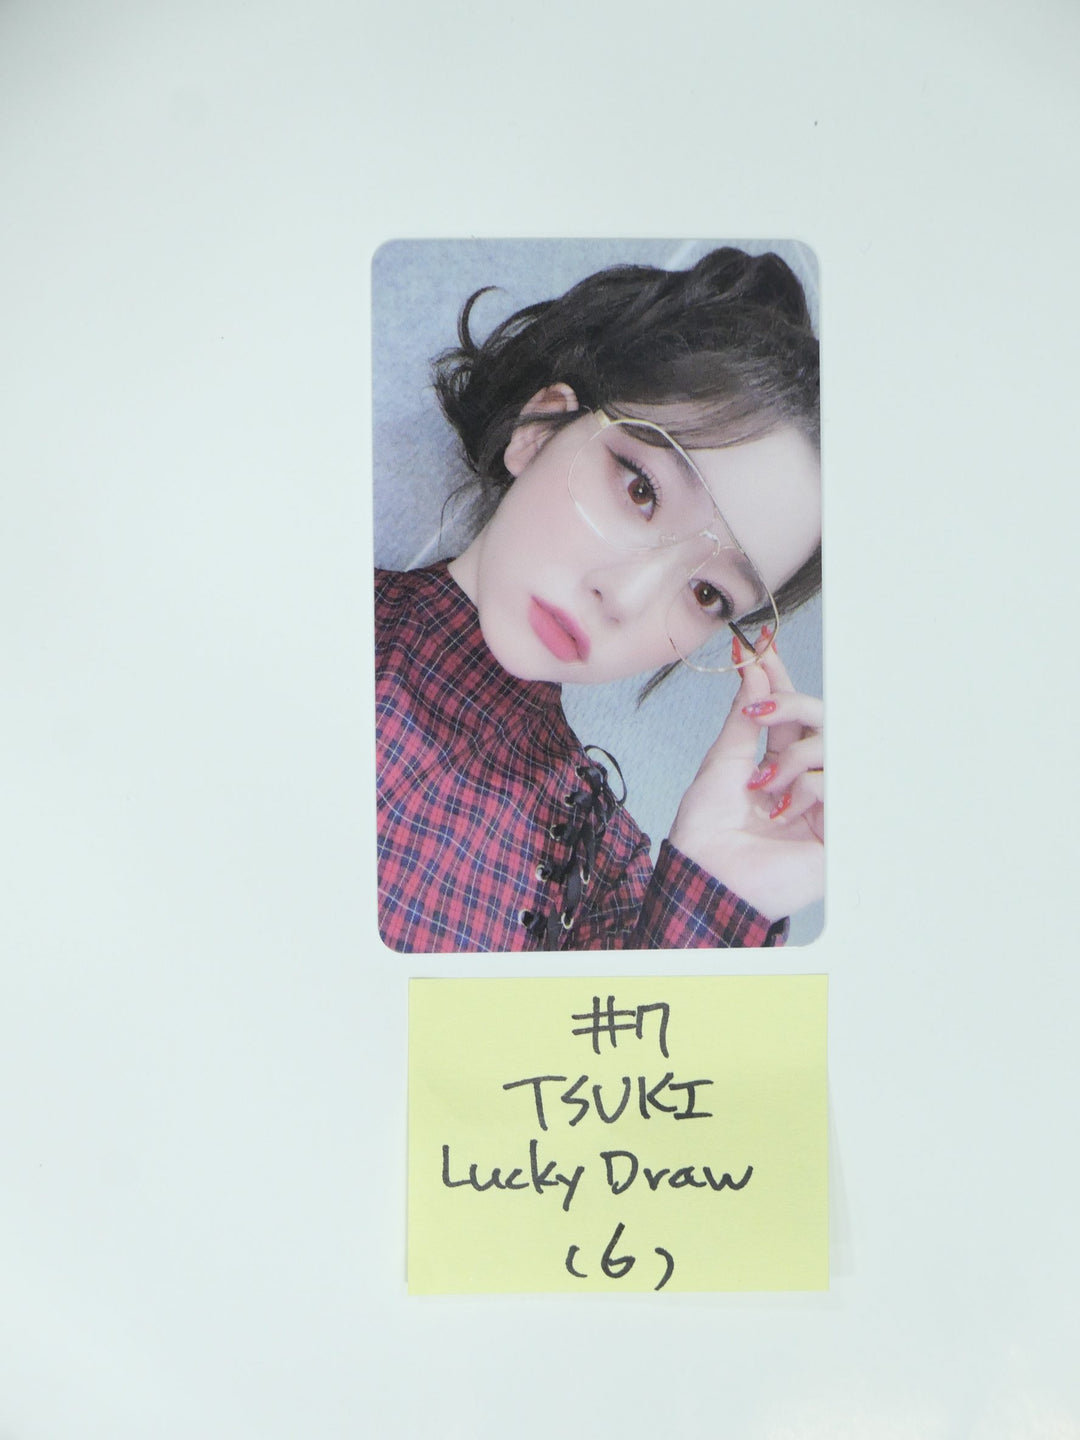 Billlie 'the collective soul and unconscious: chapter one' - Whos Fan Cafe Luckydraw Event PVC Photocard